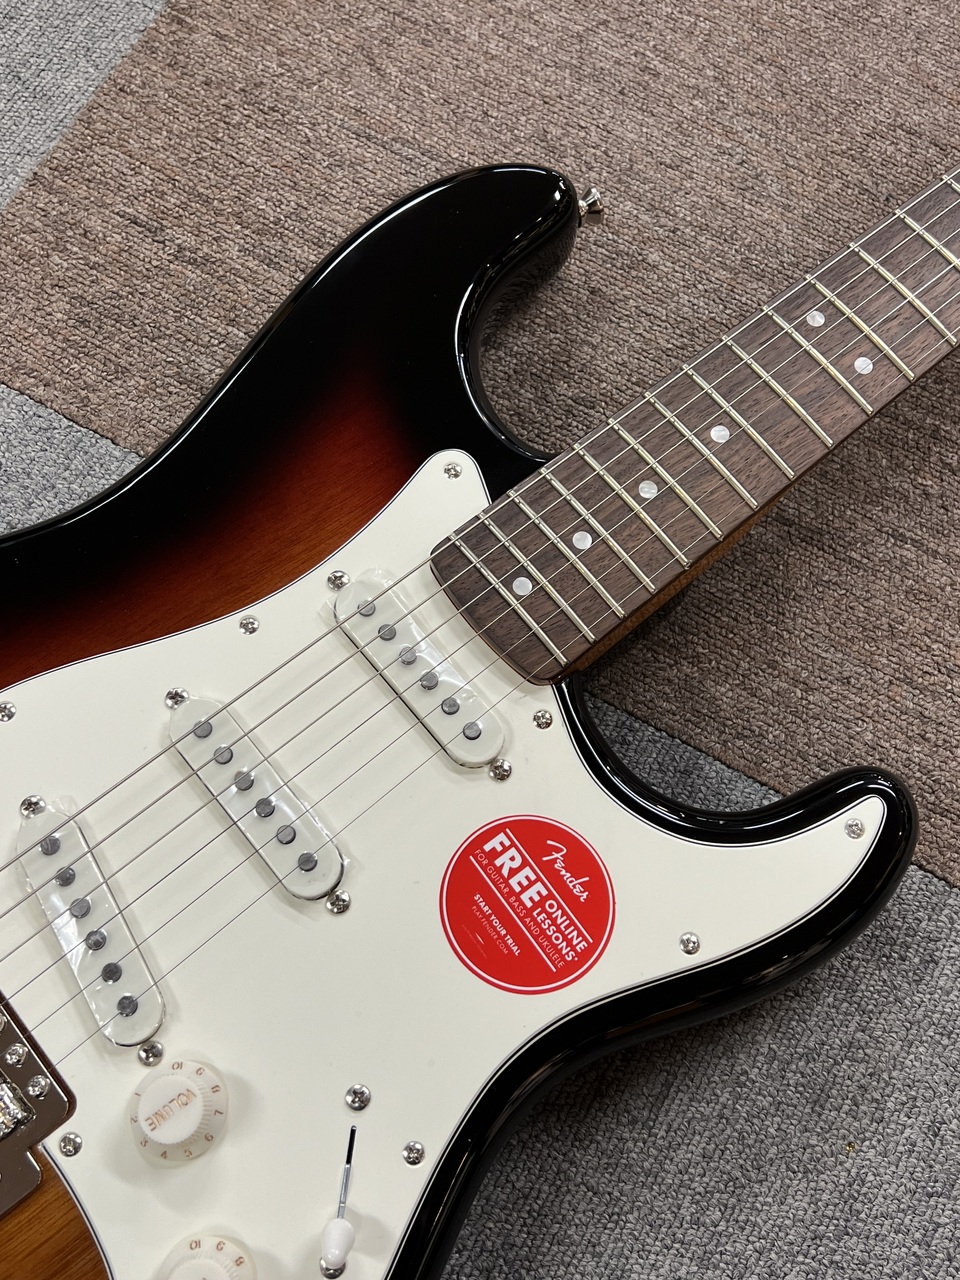 Squier by Fender Classic Vibe '60s Stratocaster